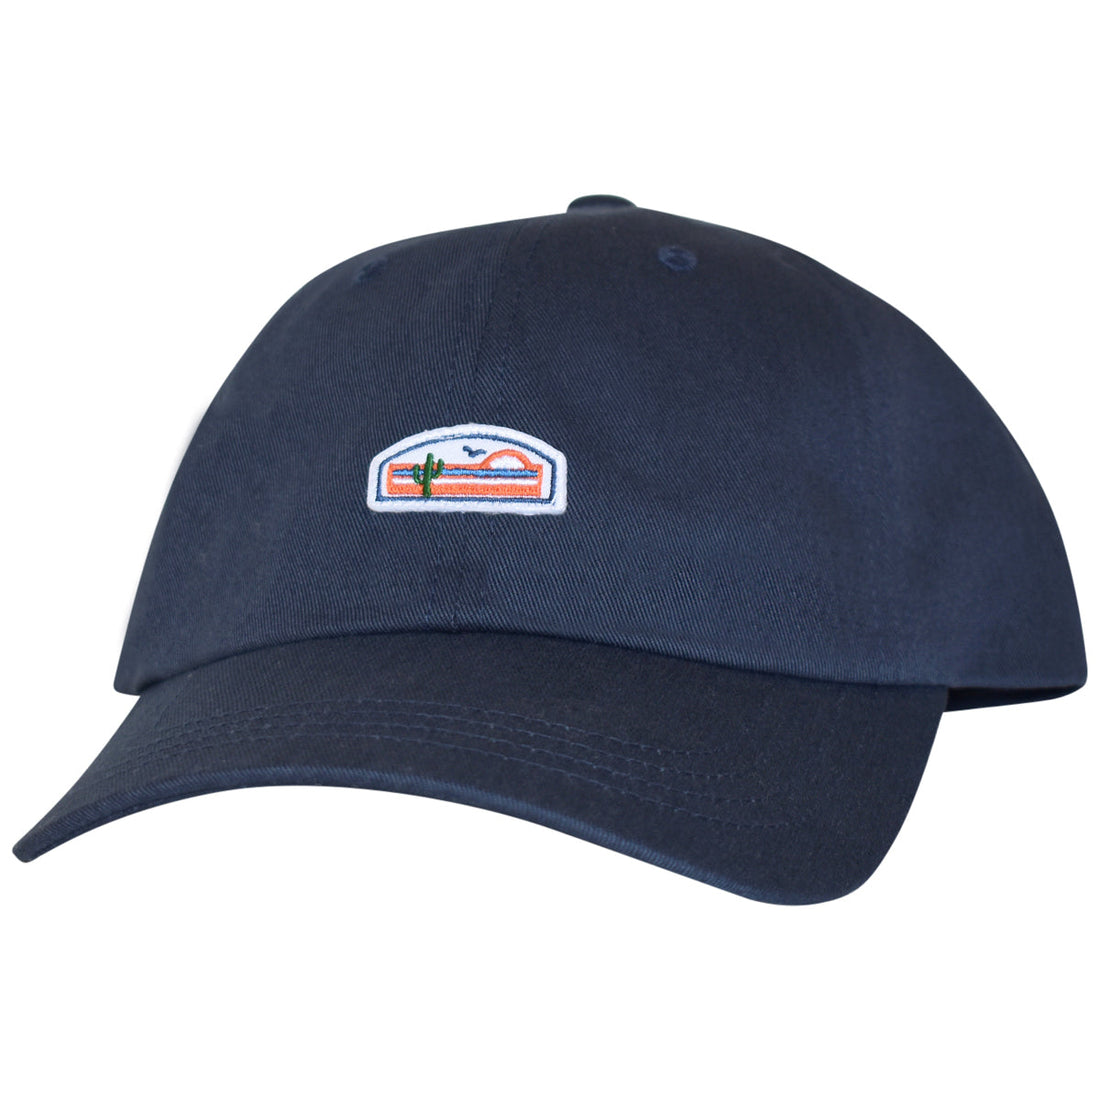 Navy blue baseball cap with a small embroidered logo on the front. The logo features a sun, mountains, and cactus design. The cap is photographed at an angle against a white background.